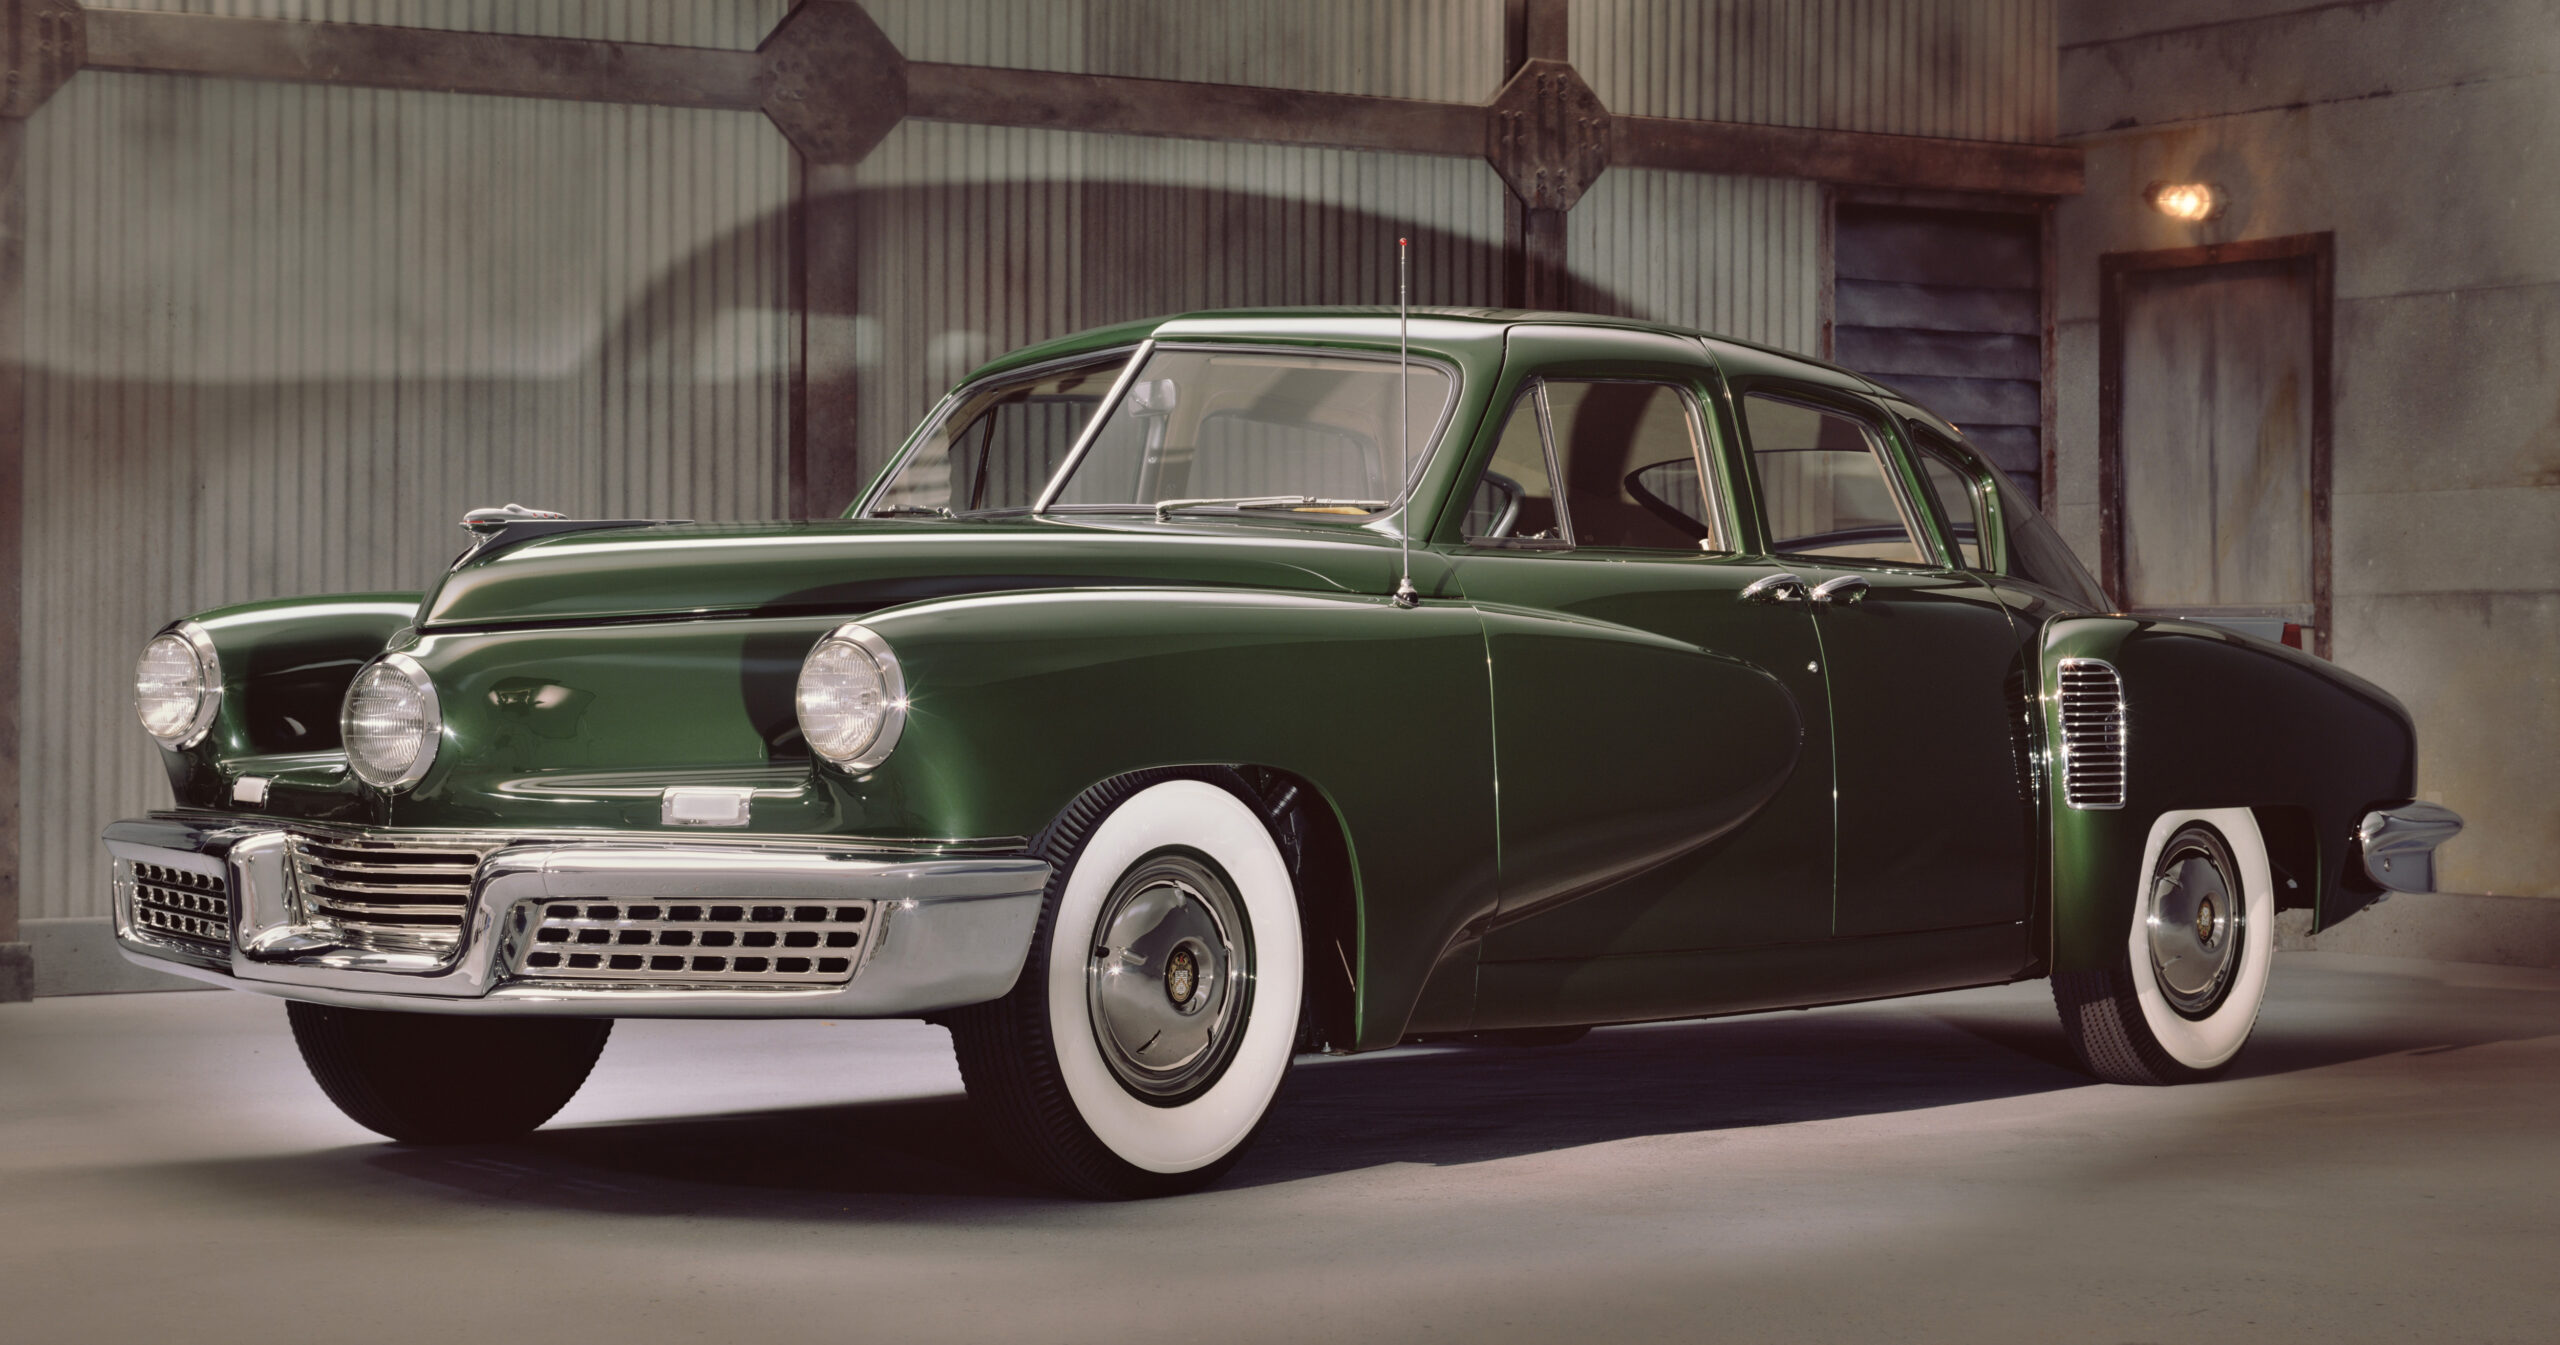 There Are Only 47 of These Vintage Tucker Cars Left in the World